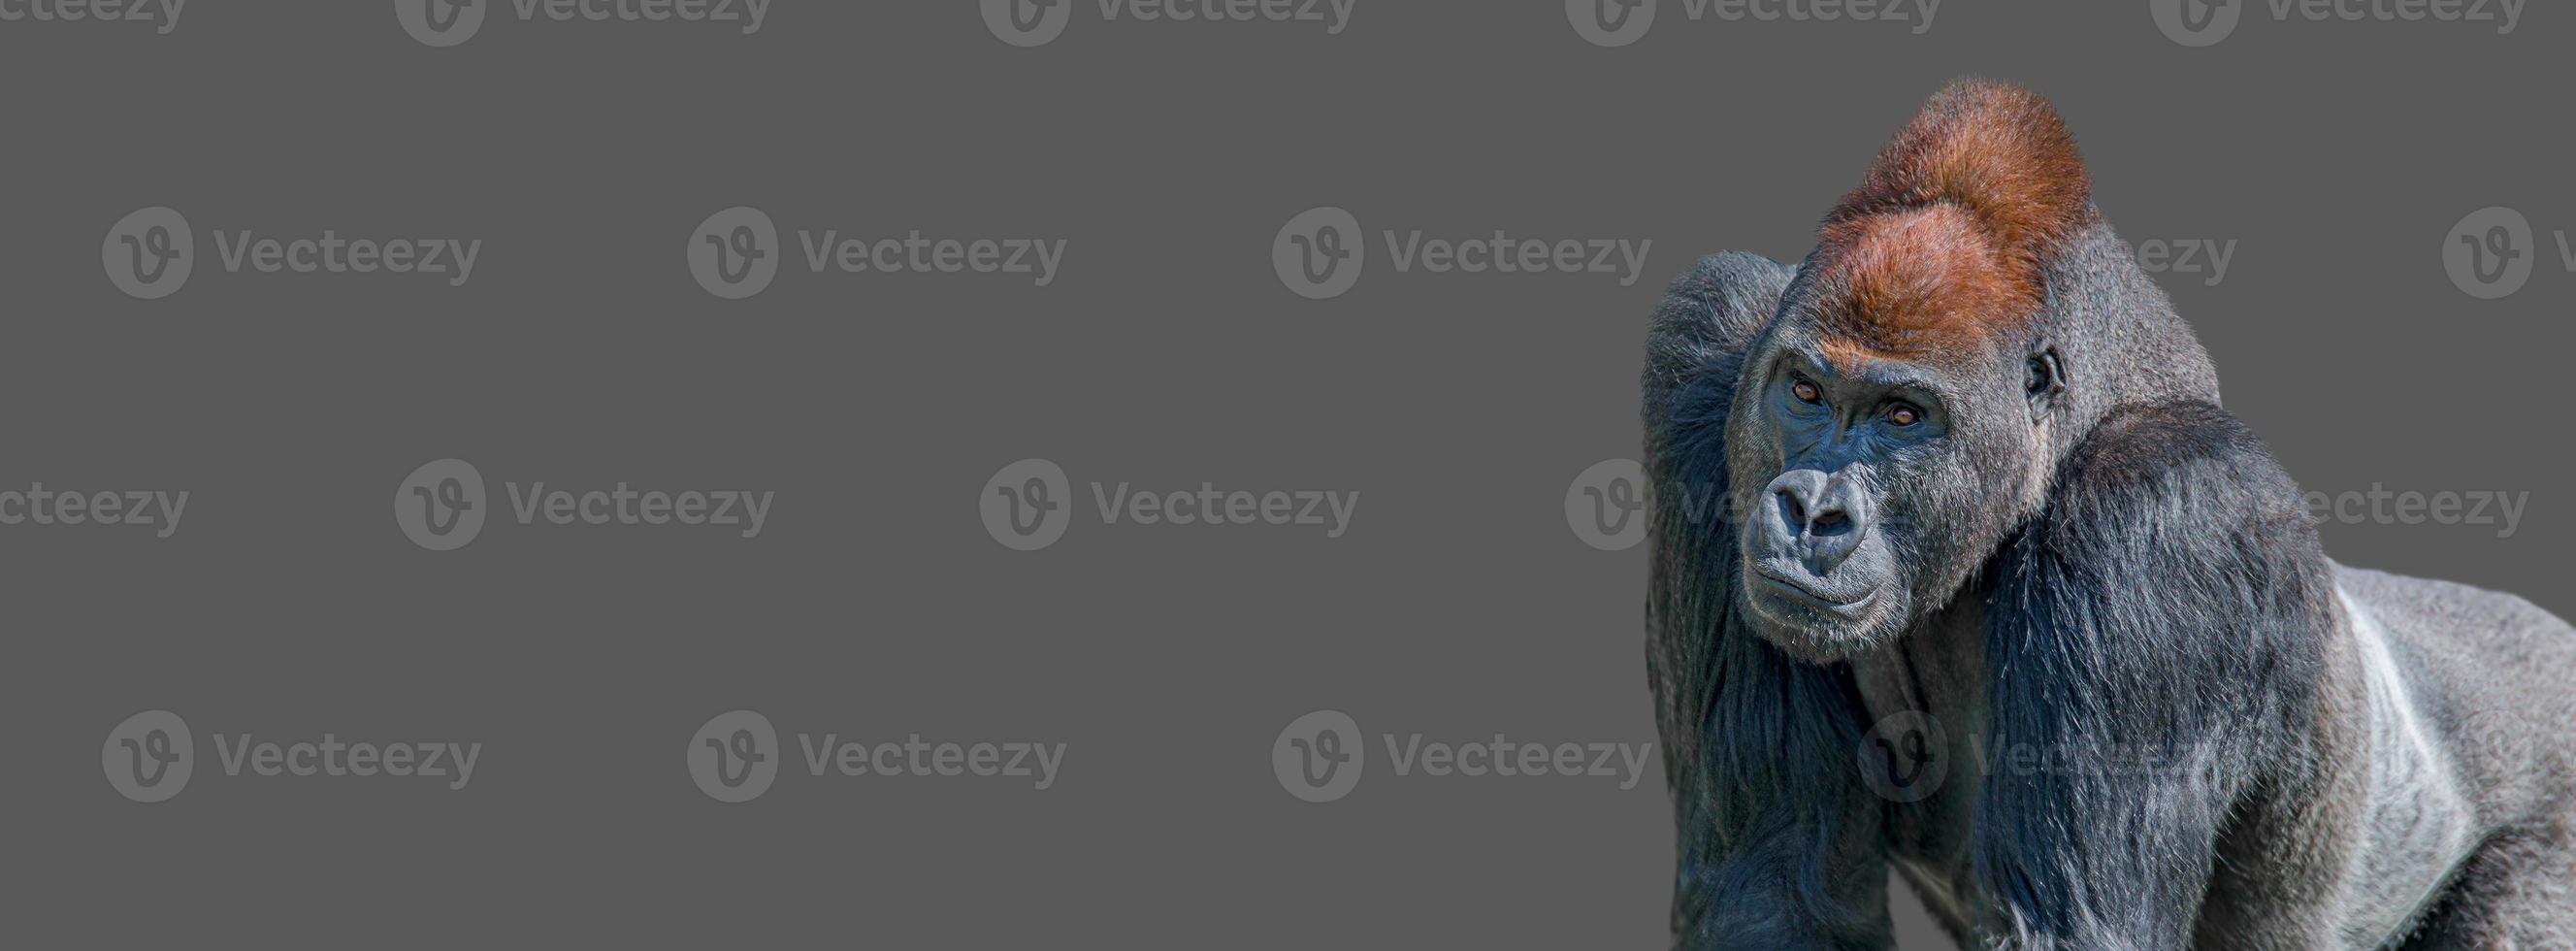 Banner with a powerful alpha male African gorilla, curious or thinking at something, at grey solid background with copy space. Concept of wildlife biodiversity, animal welfare and sustainability. photo